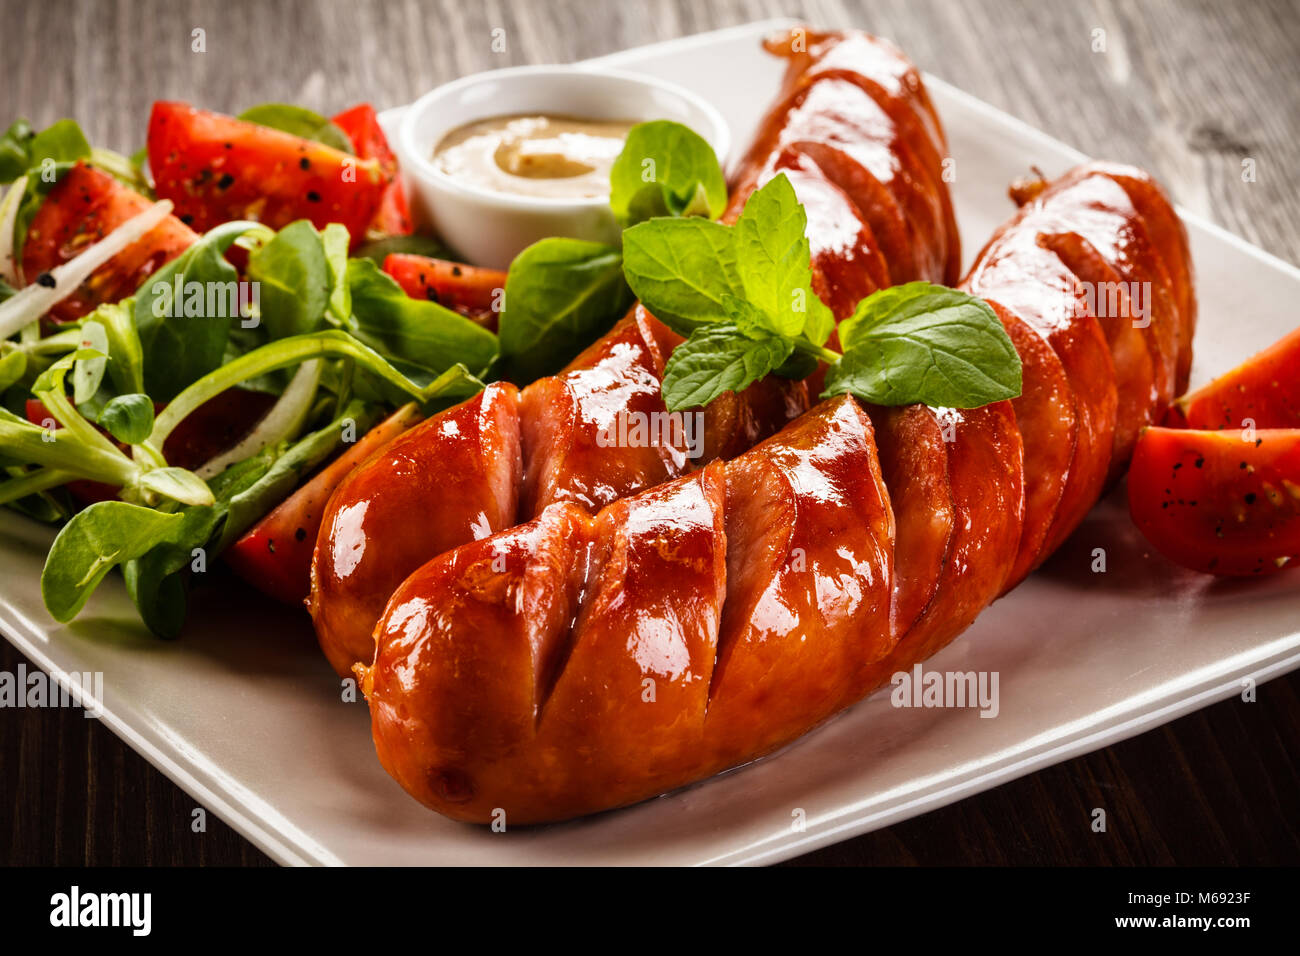 Grilled sausages on wooden table Stock Photo